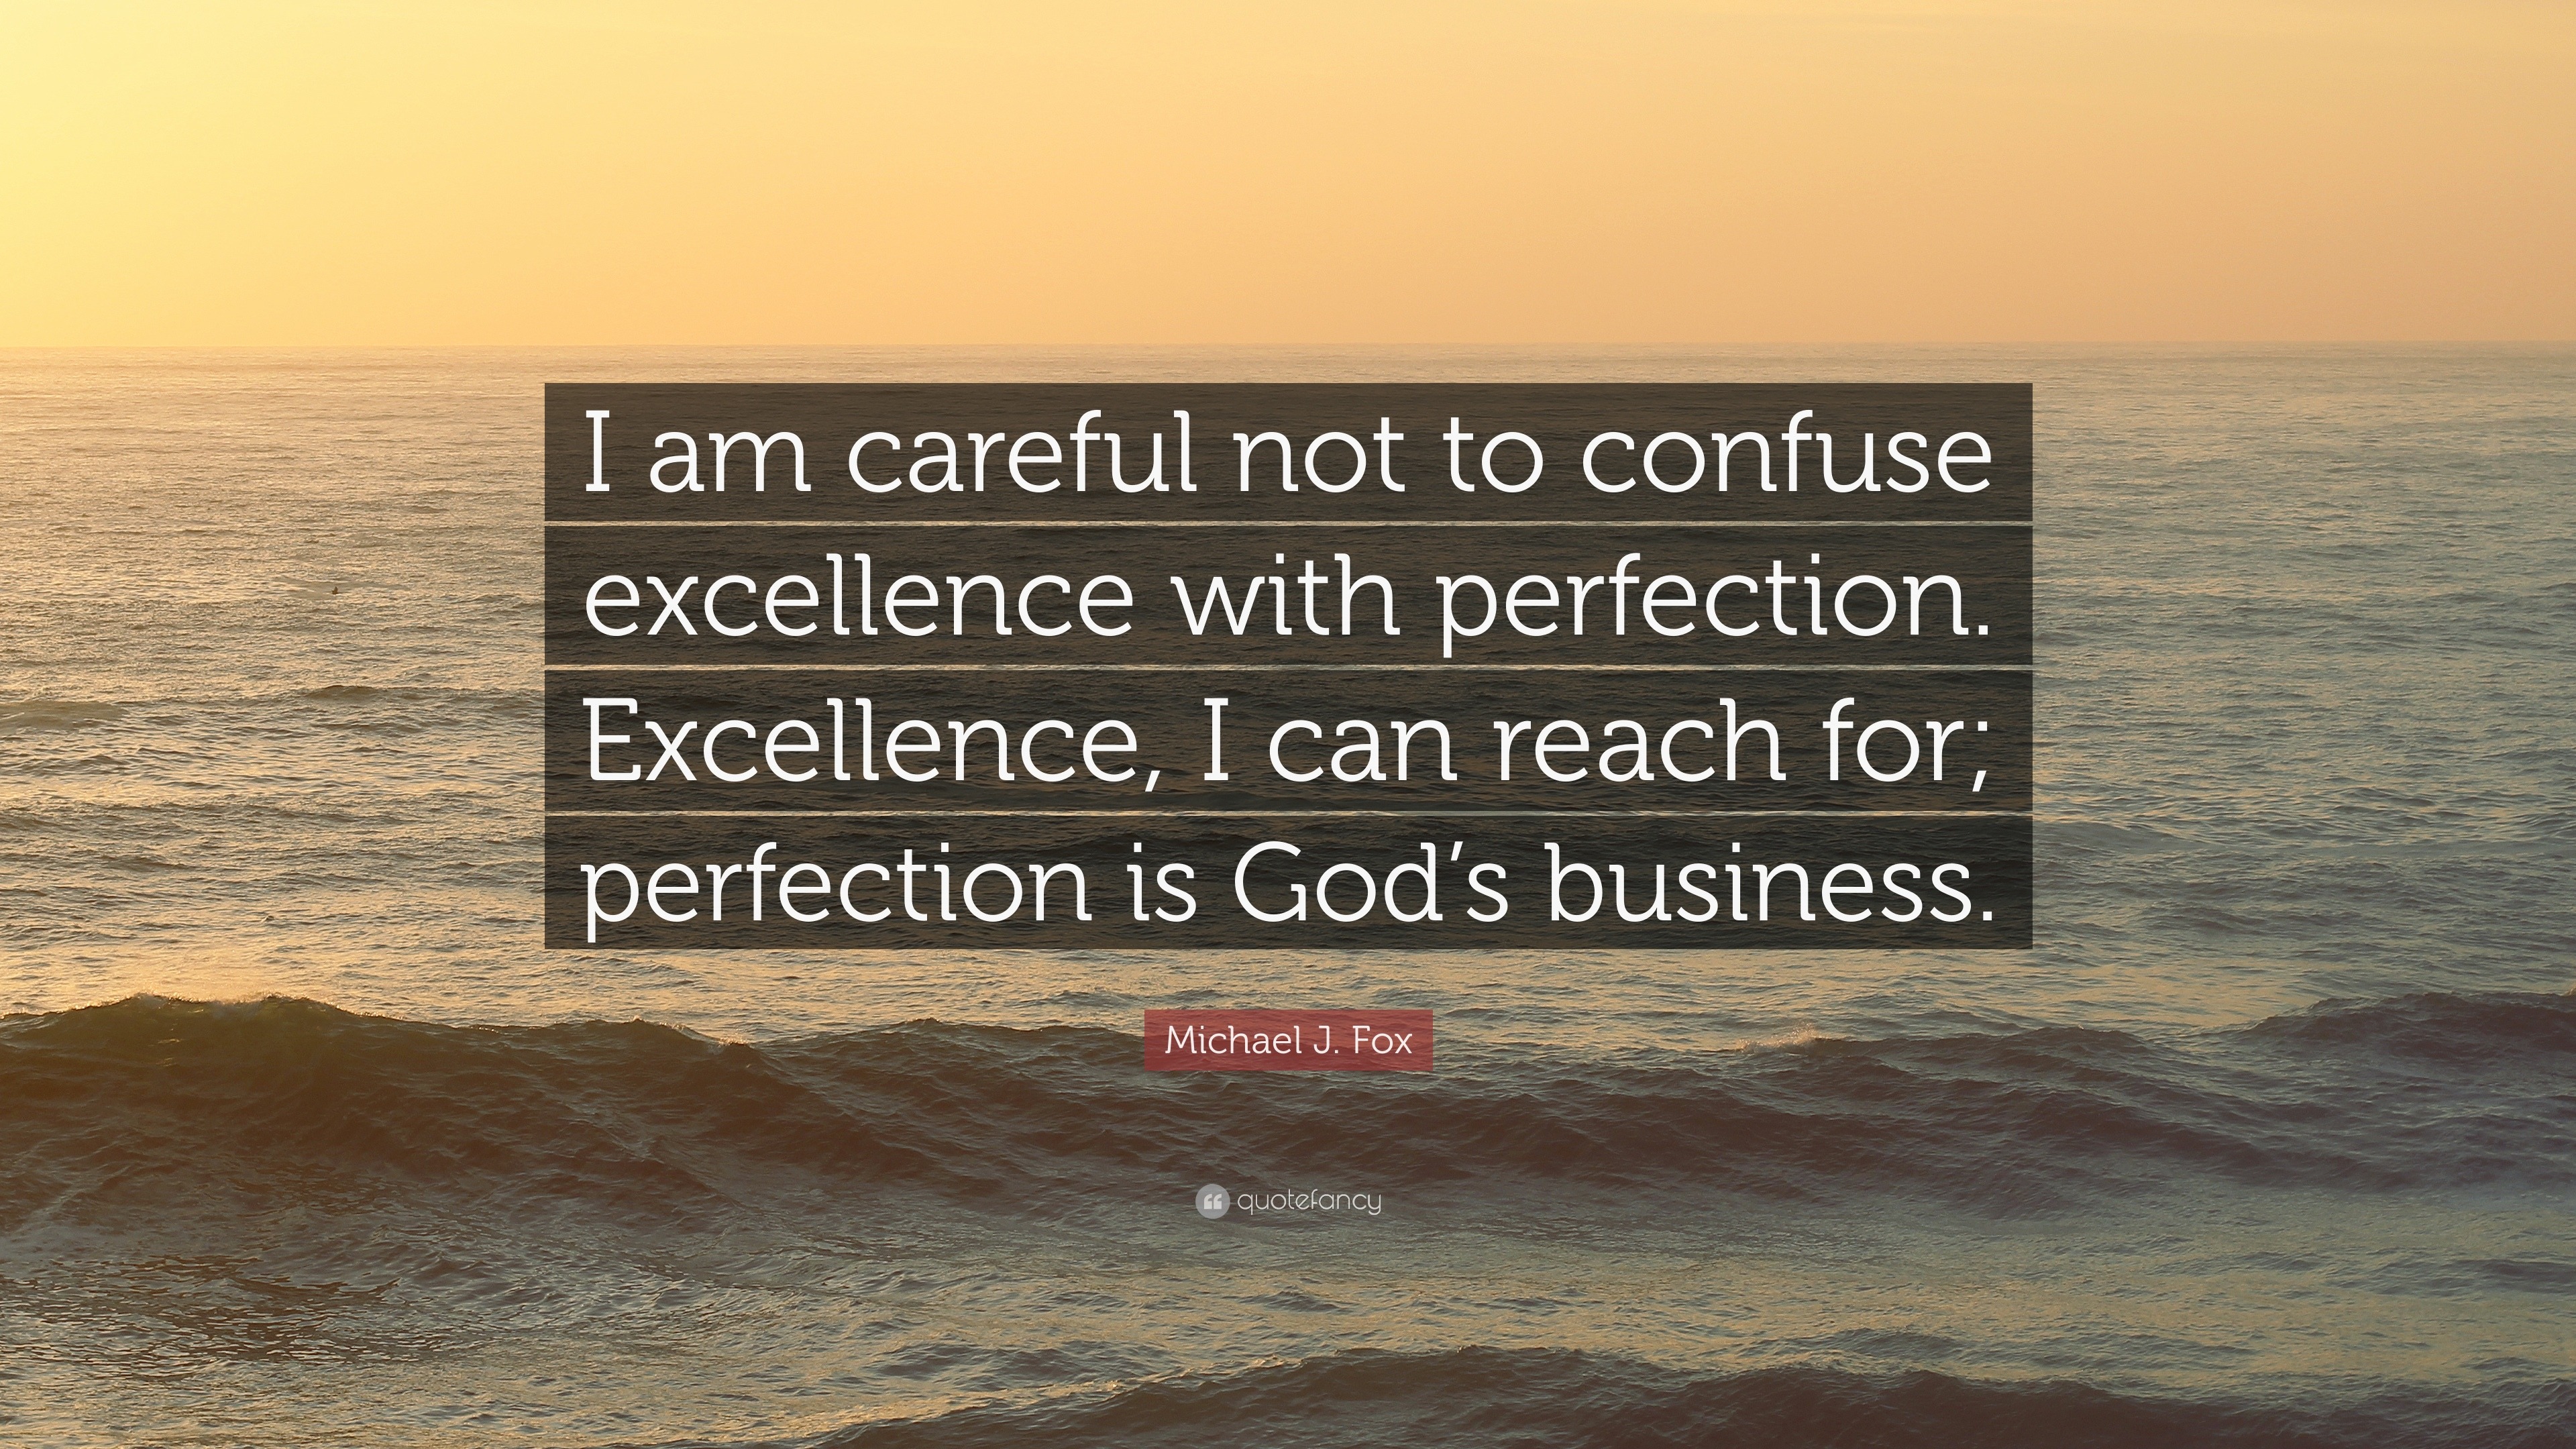 Michael J Fox Quote “i Am Careful Not To Confuse Excellence With Perfection Excellence I Can